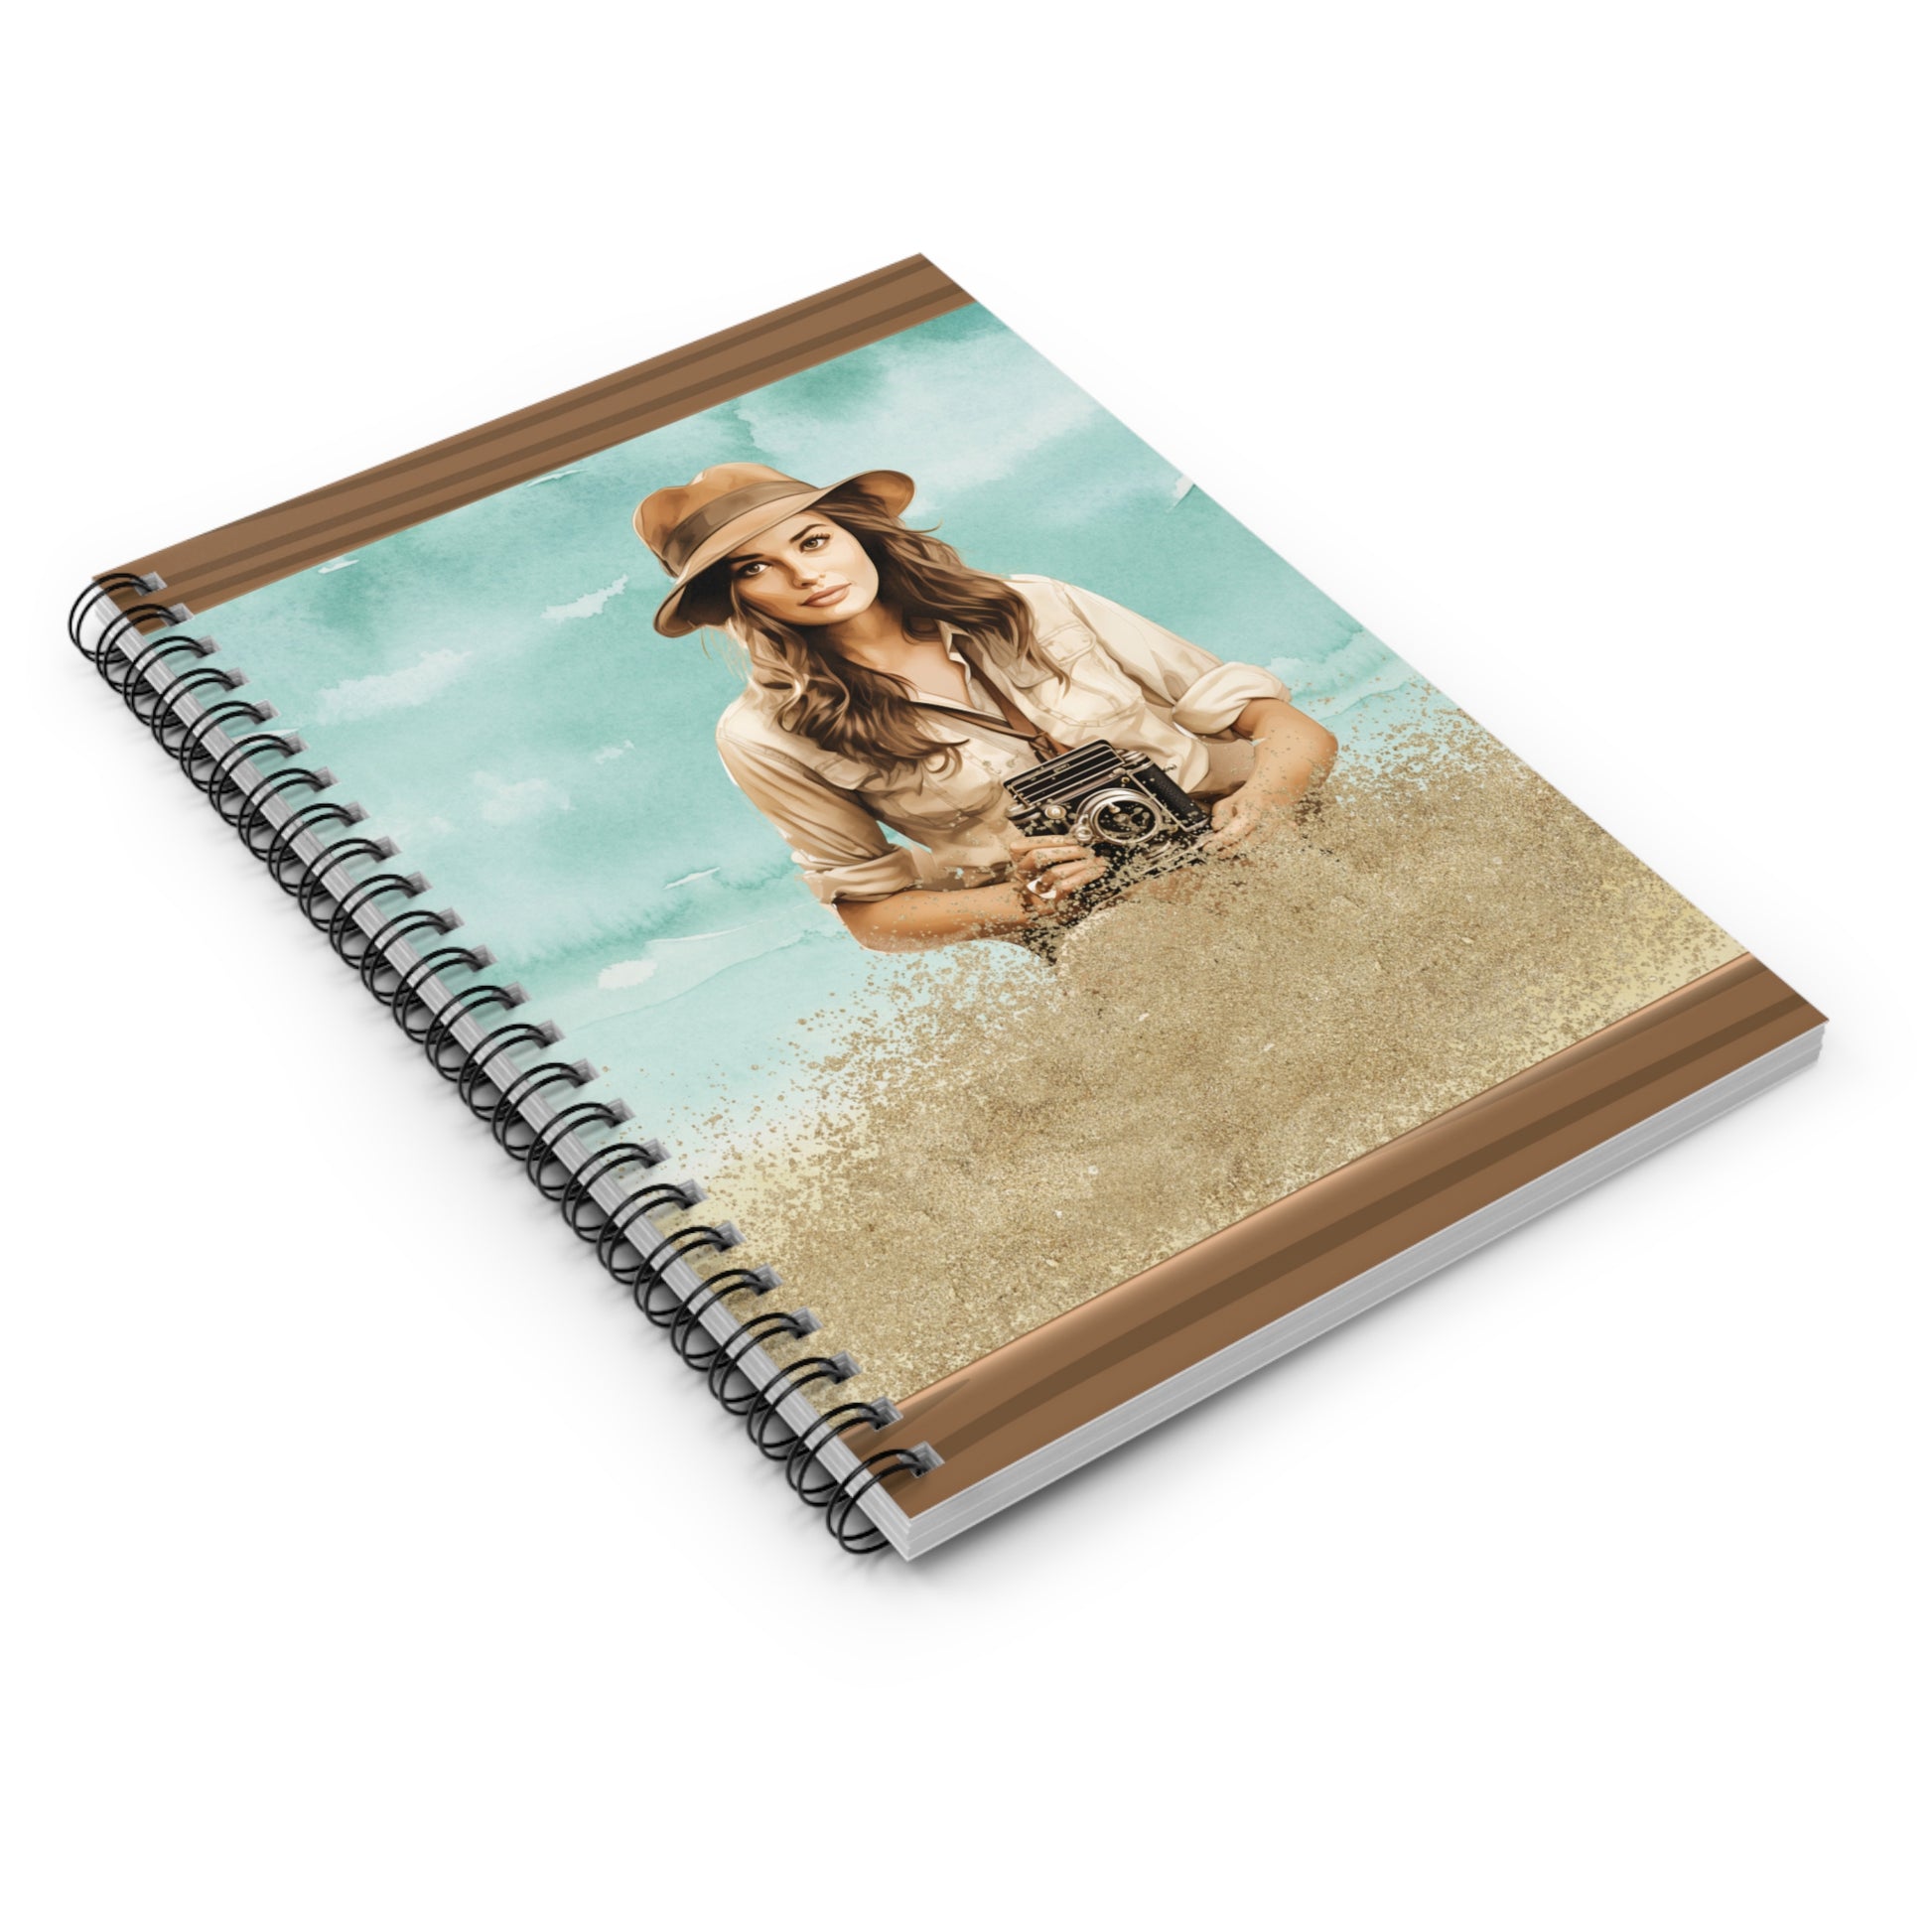 Say Cheese: Spiral Notebook - Log Books - Journals - Diaries - and More Custom Printed by TheGlassyLass.com